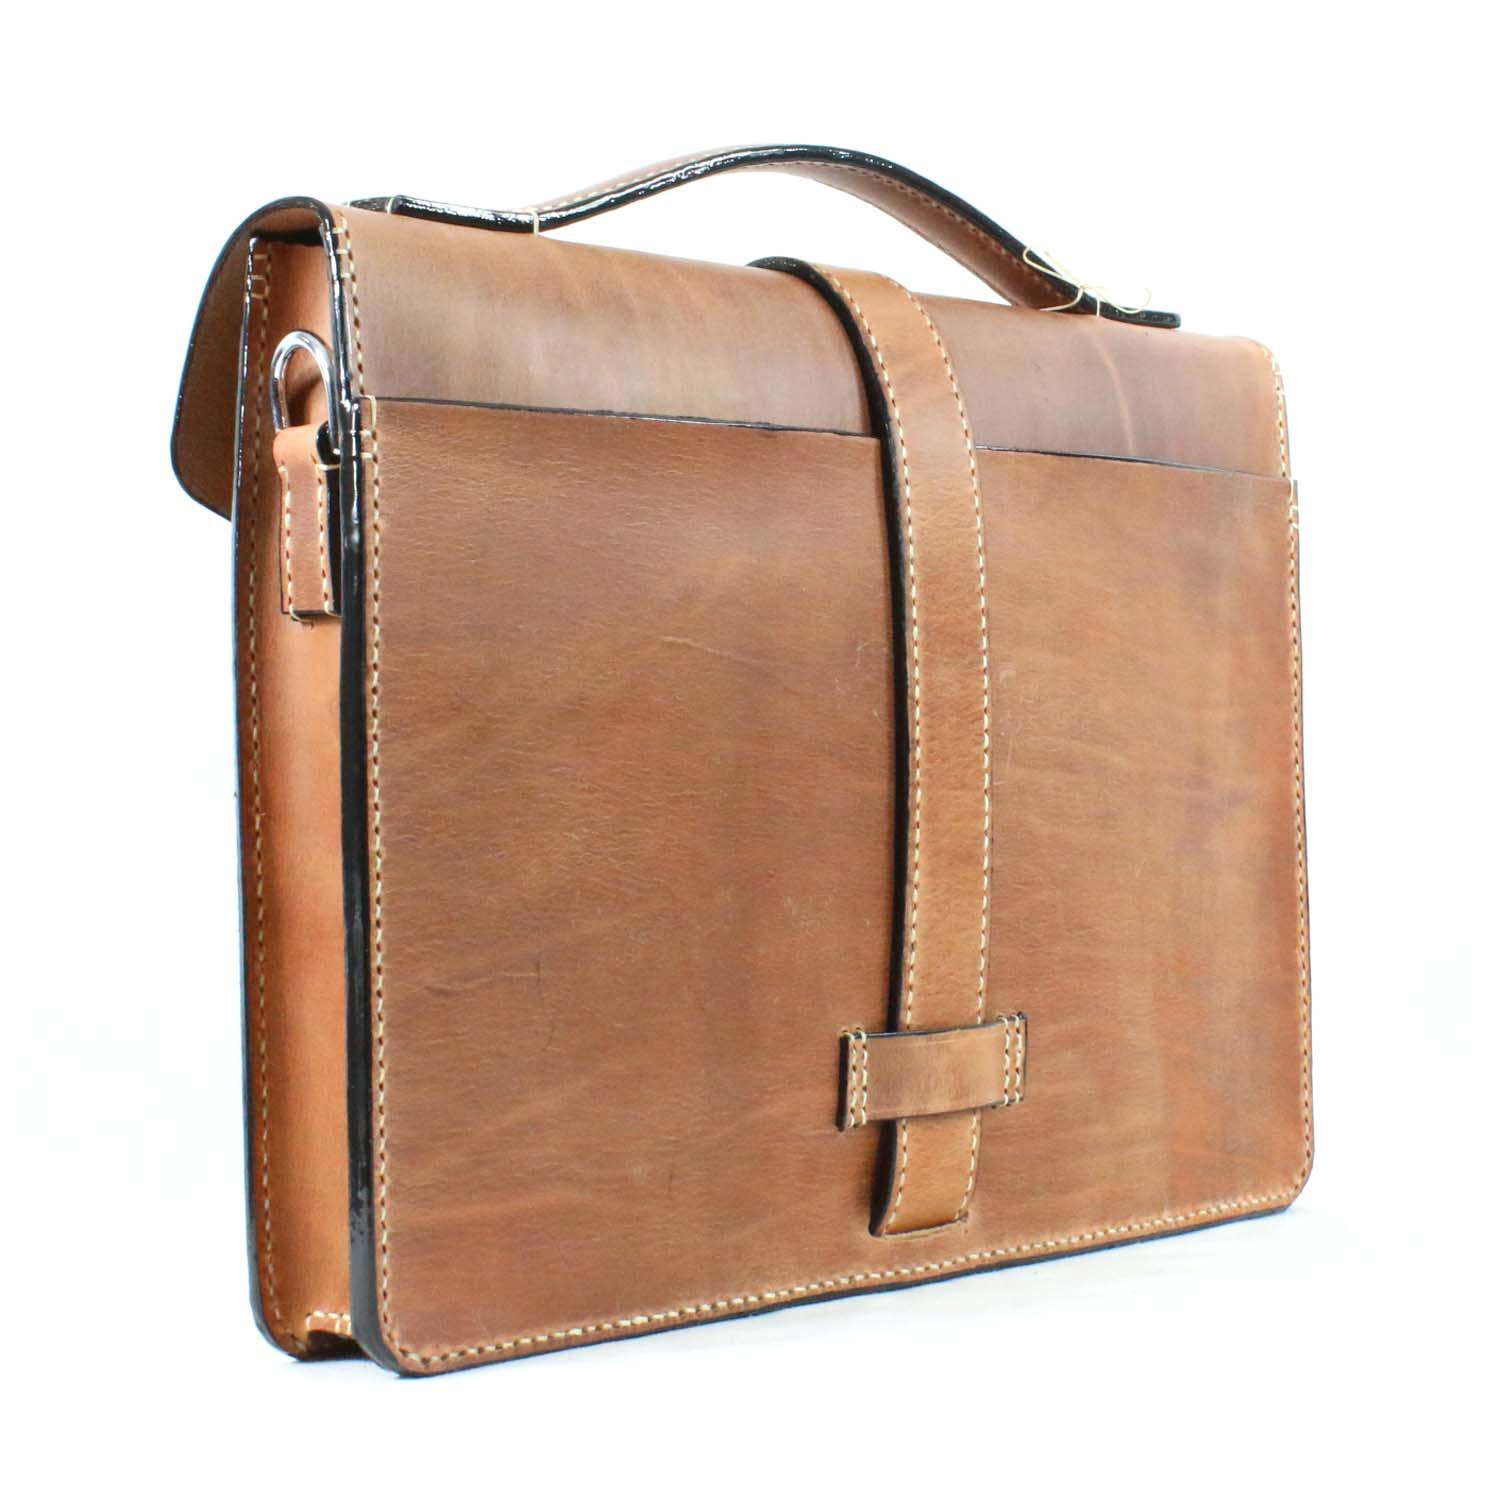 Maxwell - Harness Leather Briefcase - Marcellino